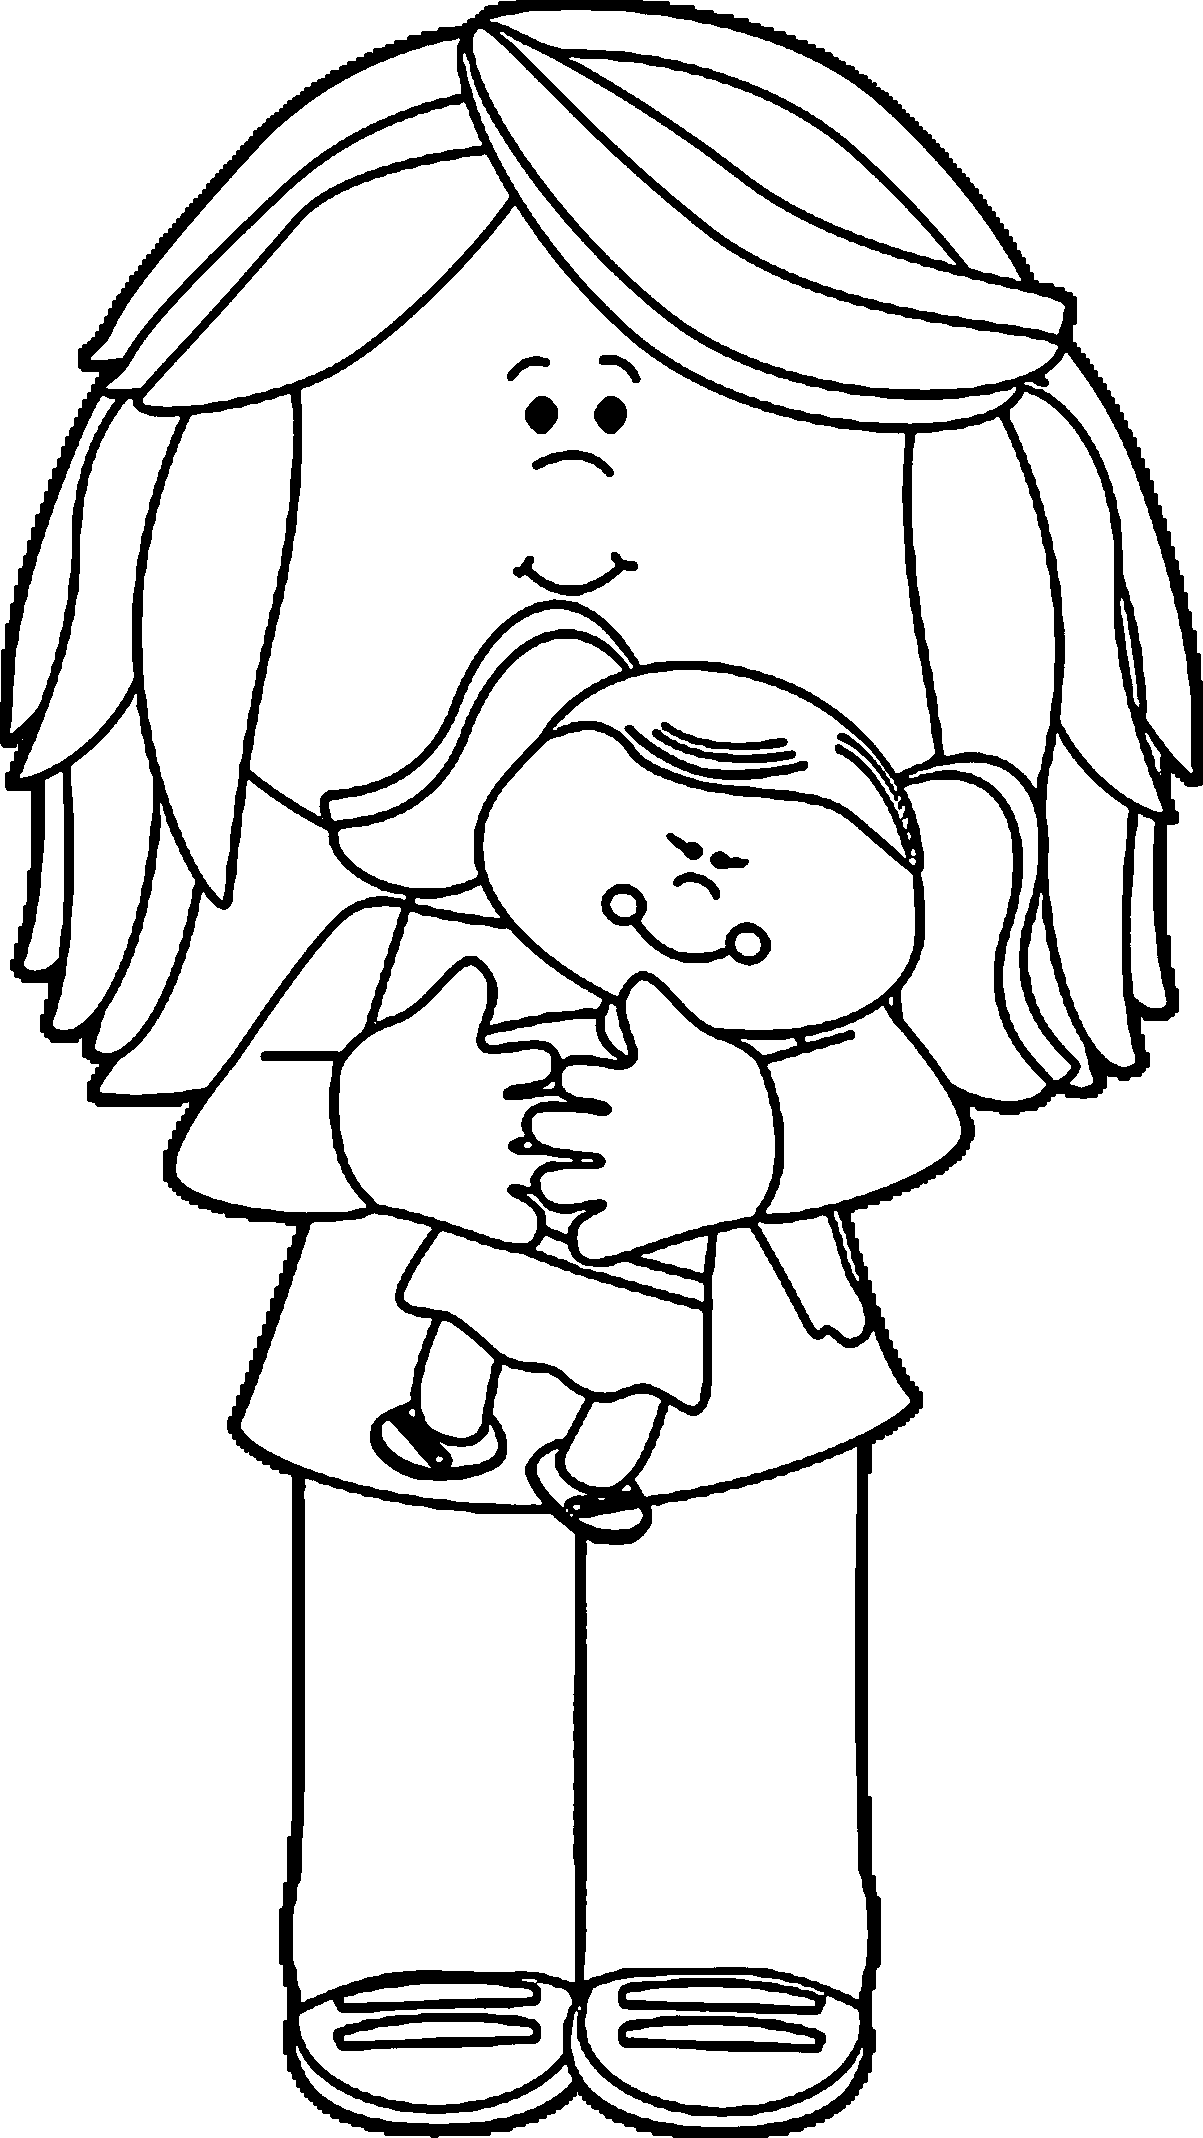 Little Girl Holding Baby Doll Coloring Page | Wecoloringpage